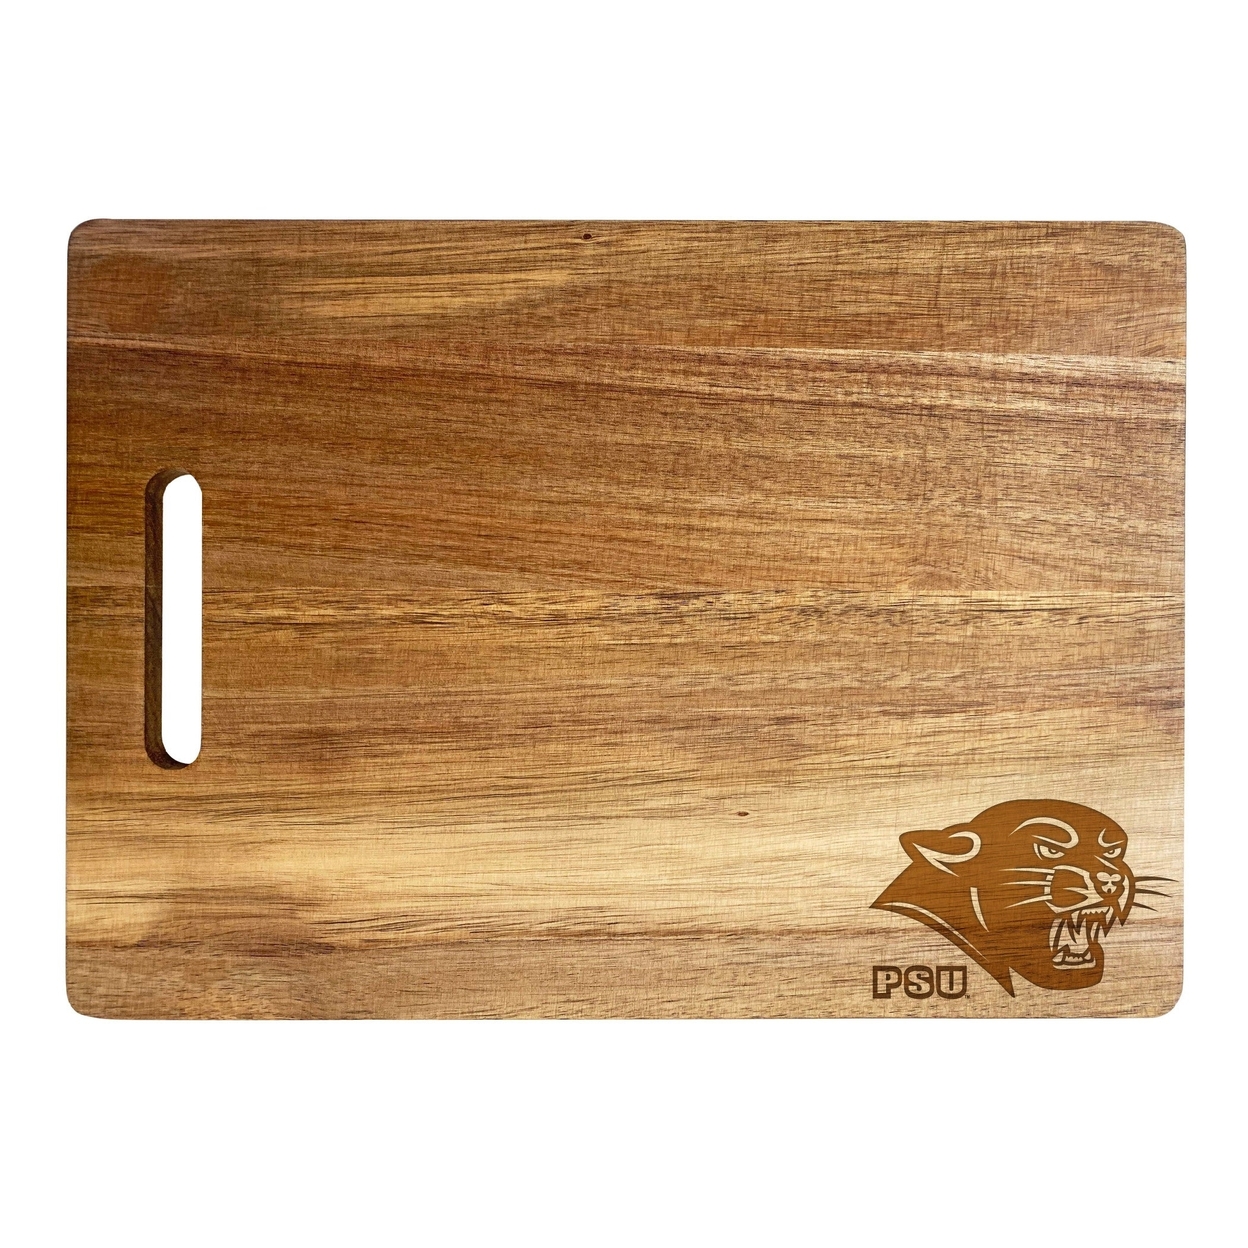 Plymouth State University Engraved Wooden Cutting Board 10 X 14 Acacia Wood - Small Engraving